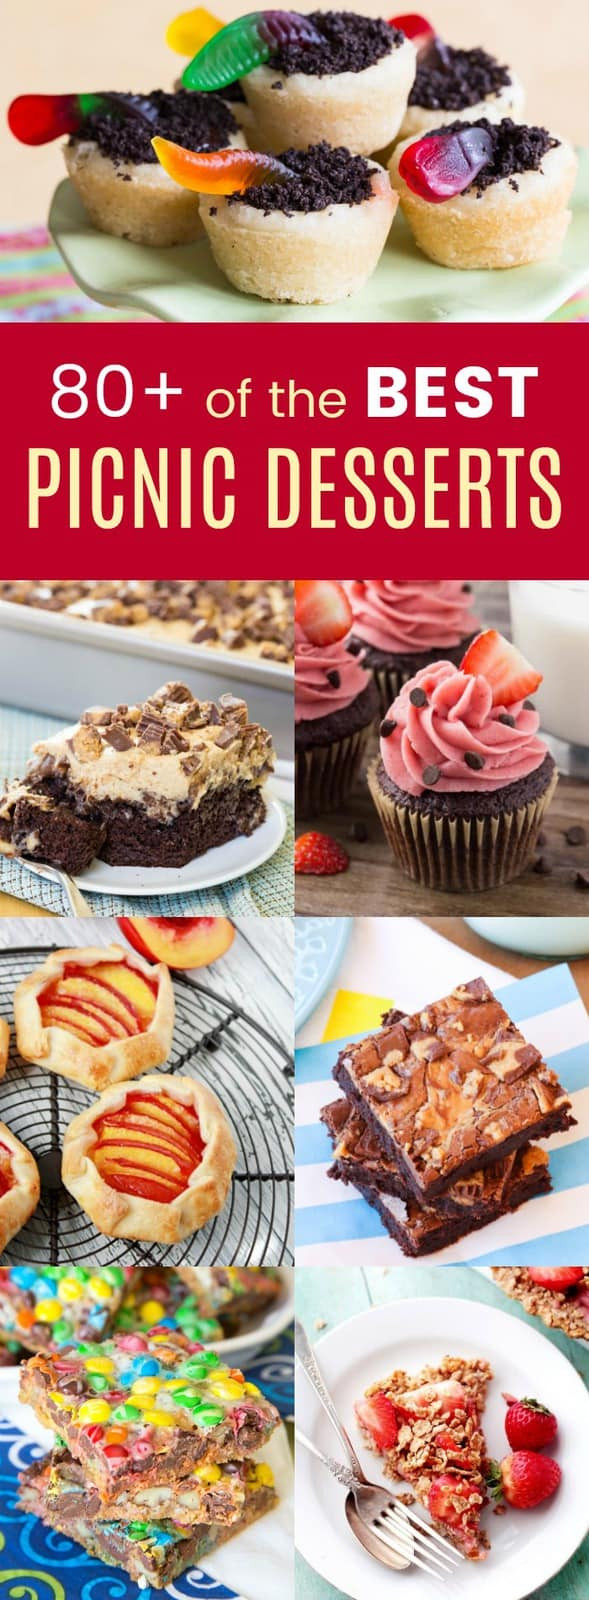 Desserts For Picnic
 Over 80 Recipes for Picnic Desserts Cupcakes & Kale Chips